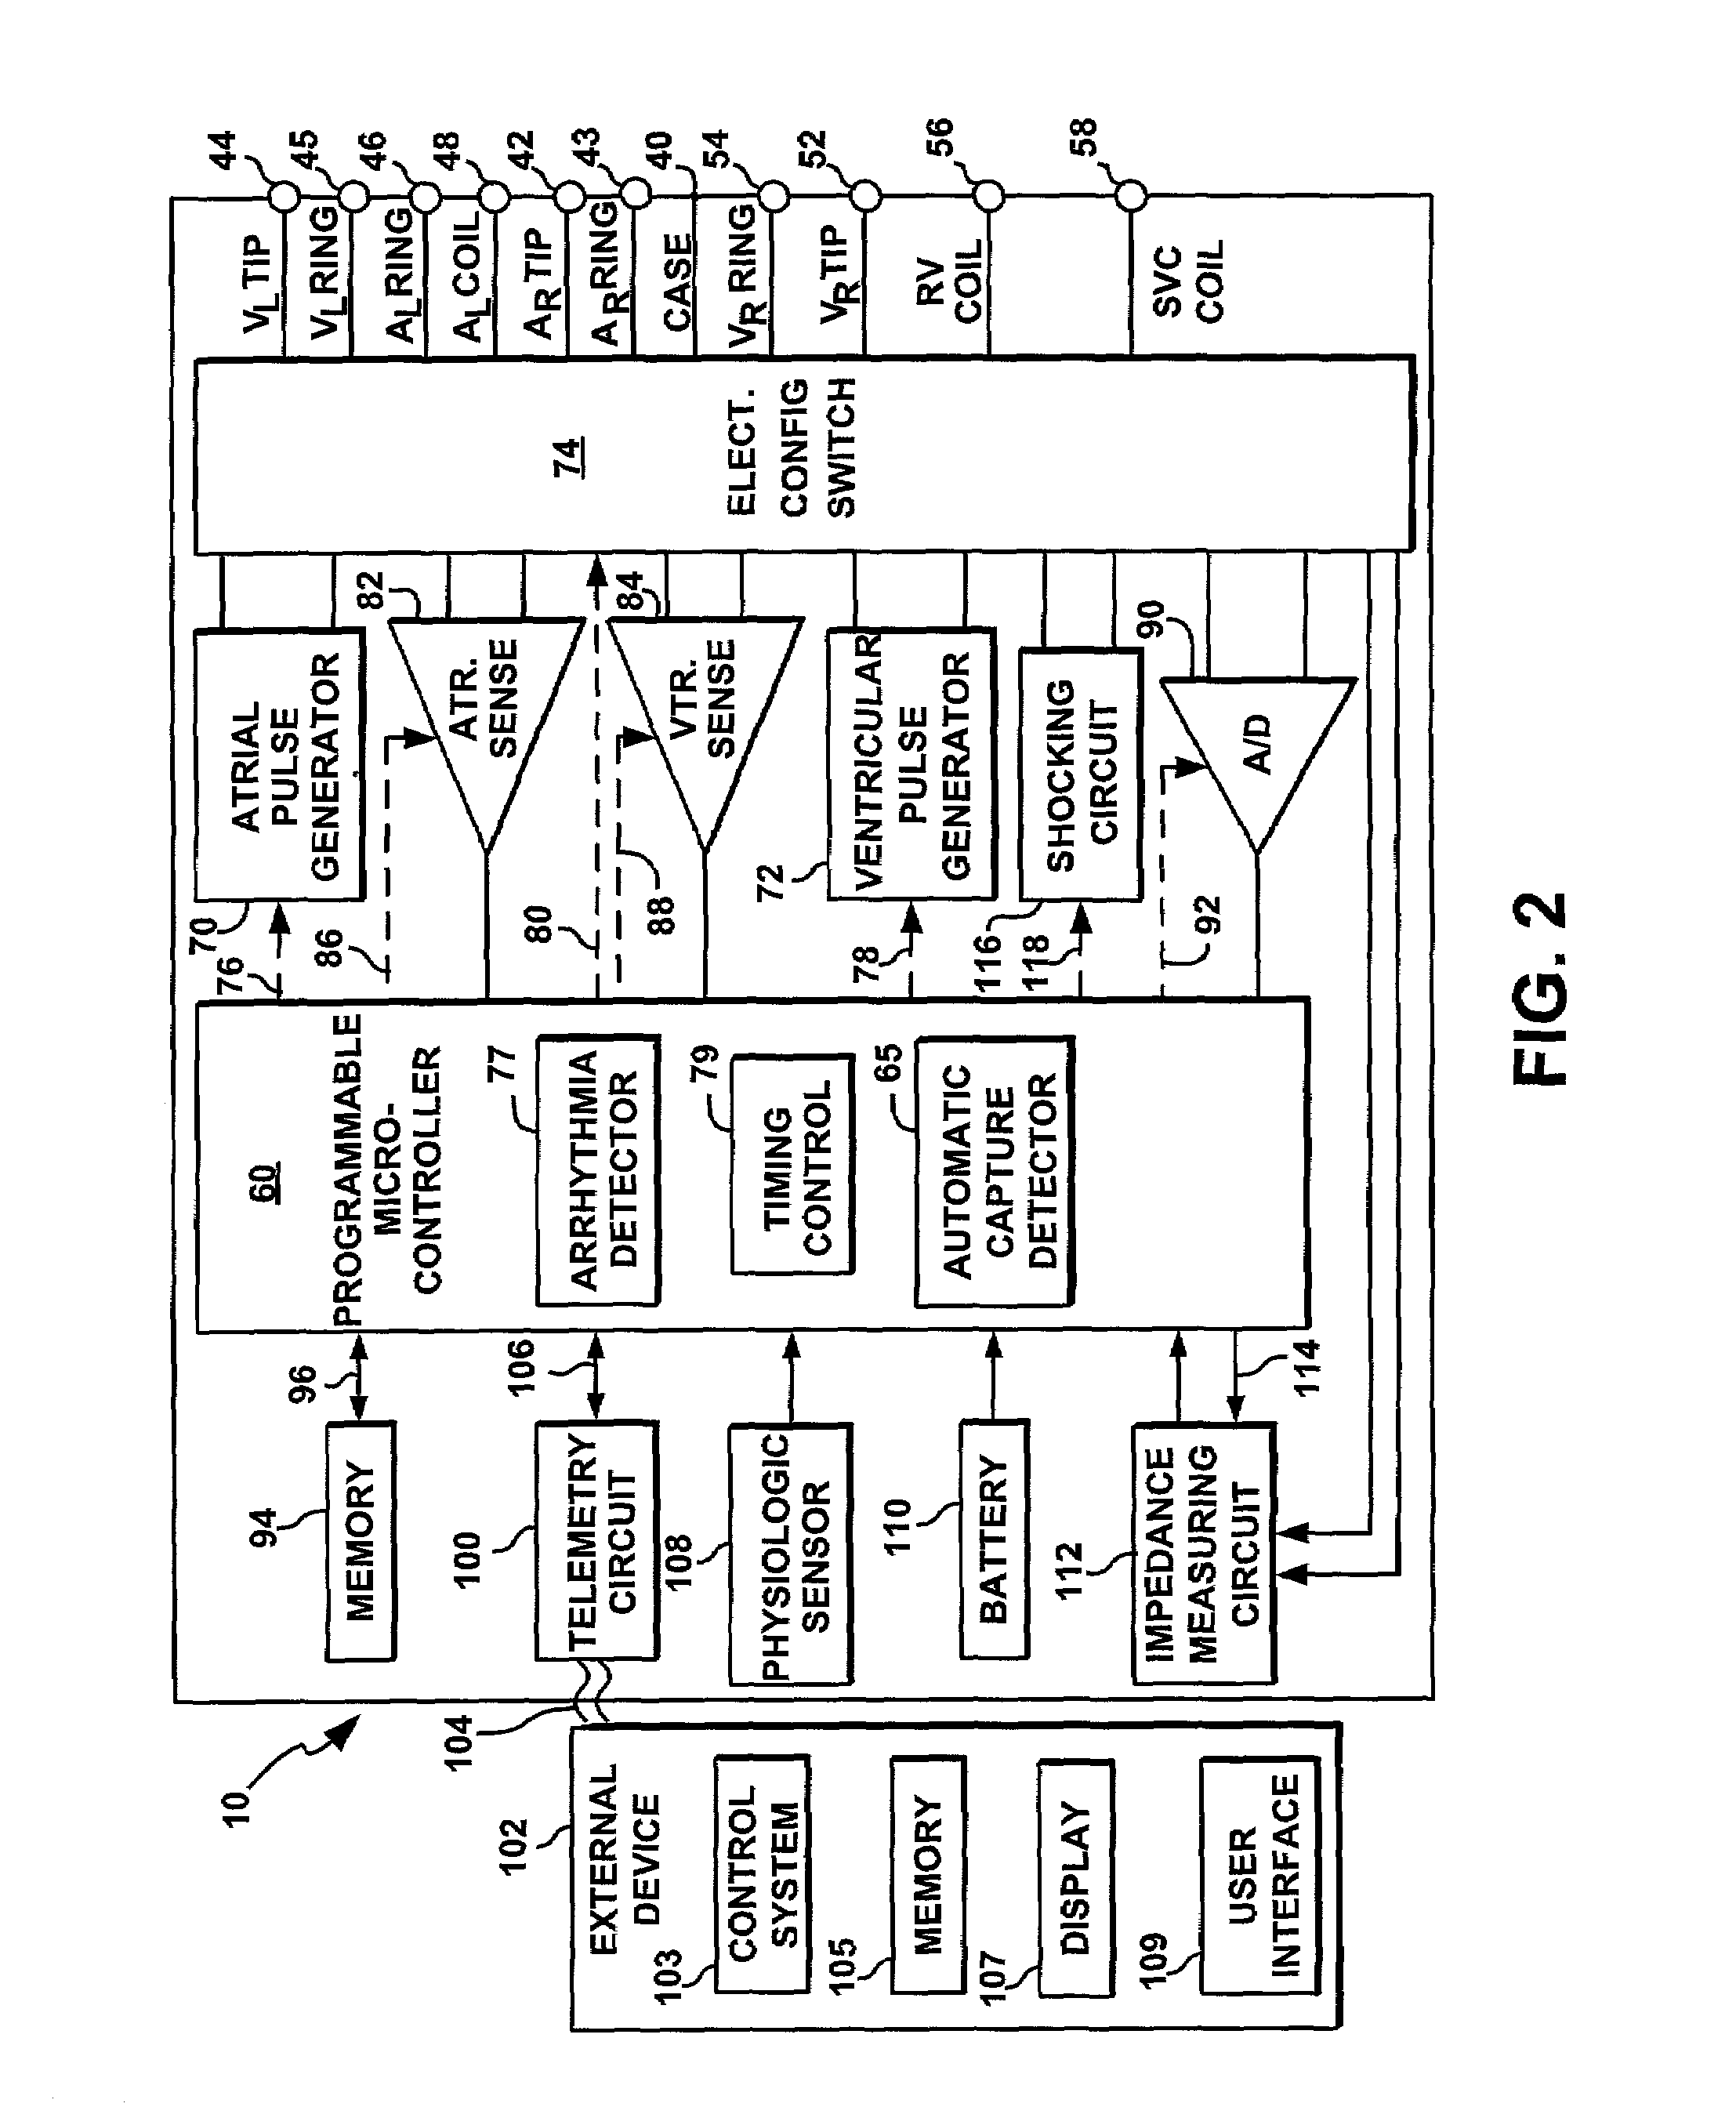 Method and apparatus for monitoring sensor performance during rate-responsive cardiac stimulation